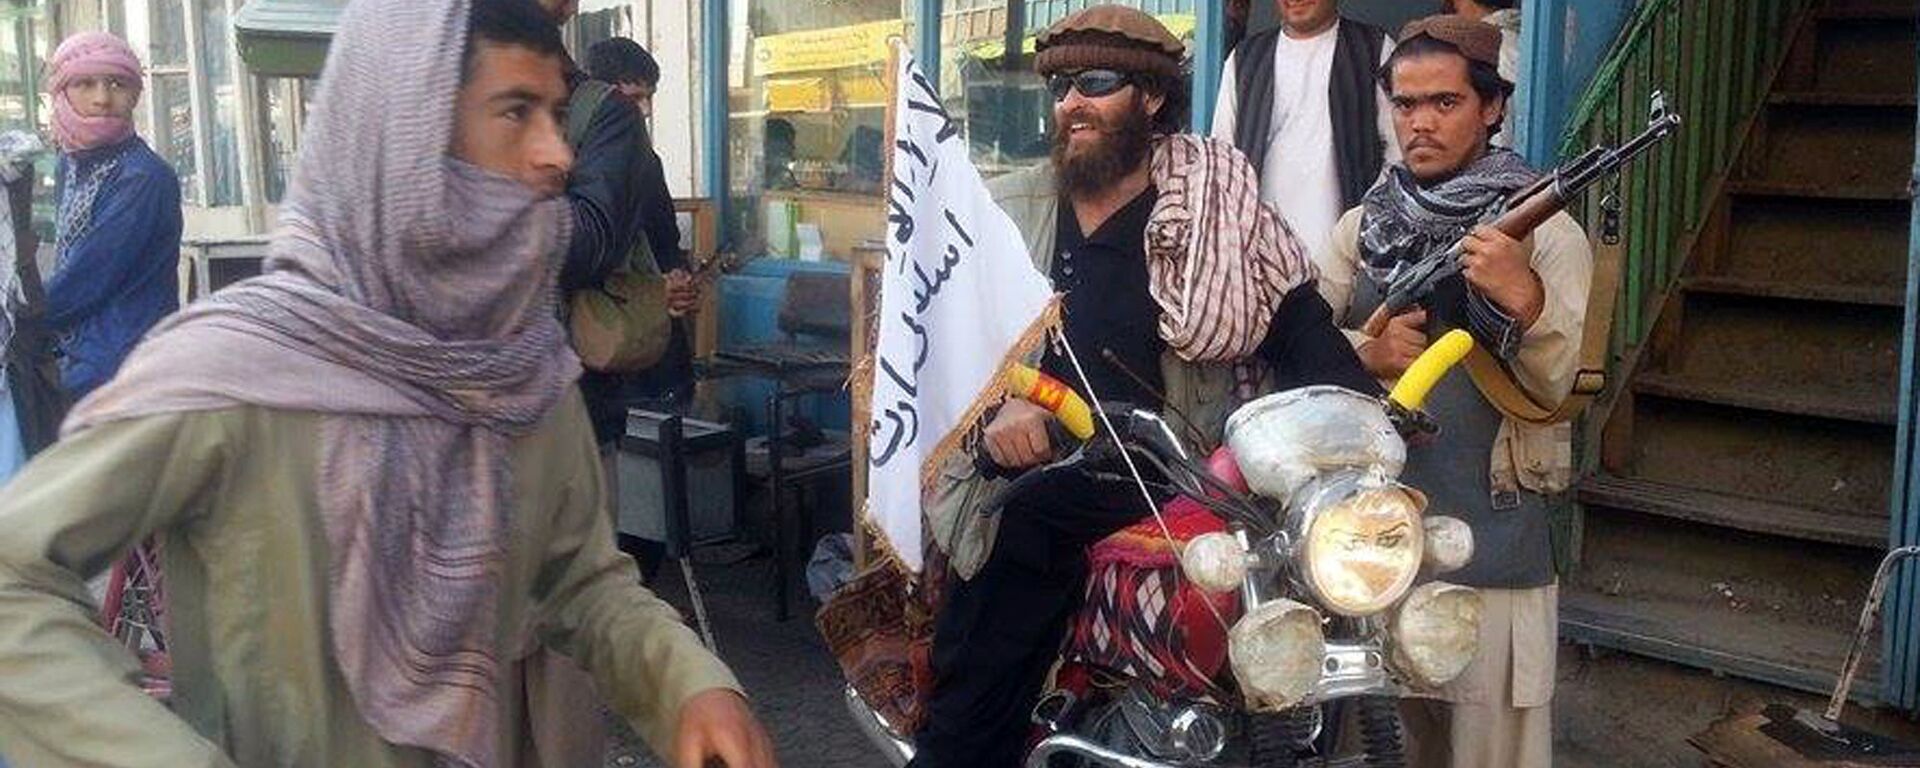 Taliban fighter sits on his motorcycle adorned with a Taliban flag in a street in Kunduz, Afghanistan - Sputnik Mundo, 1920, 13.01.2022